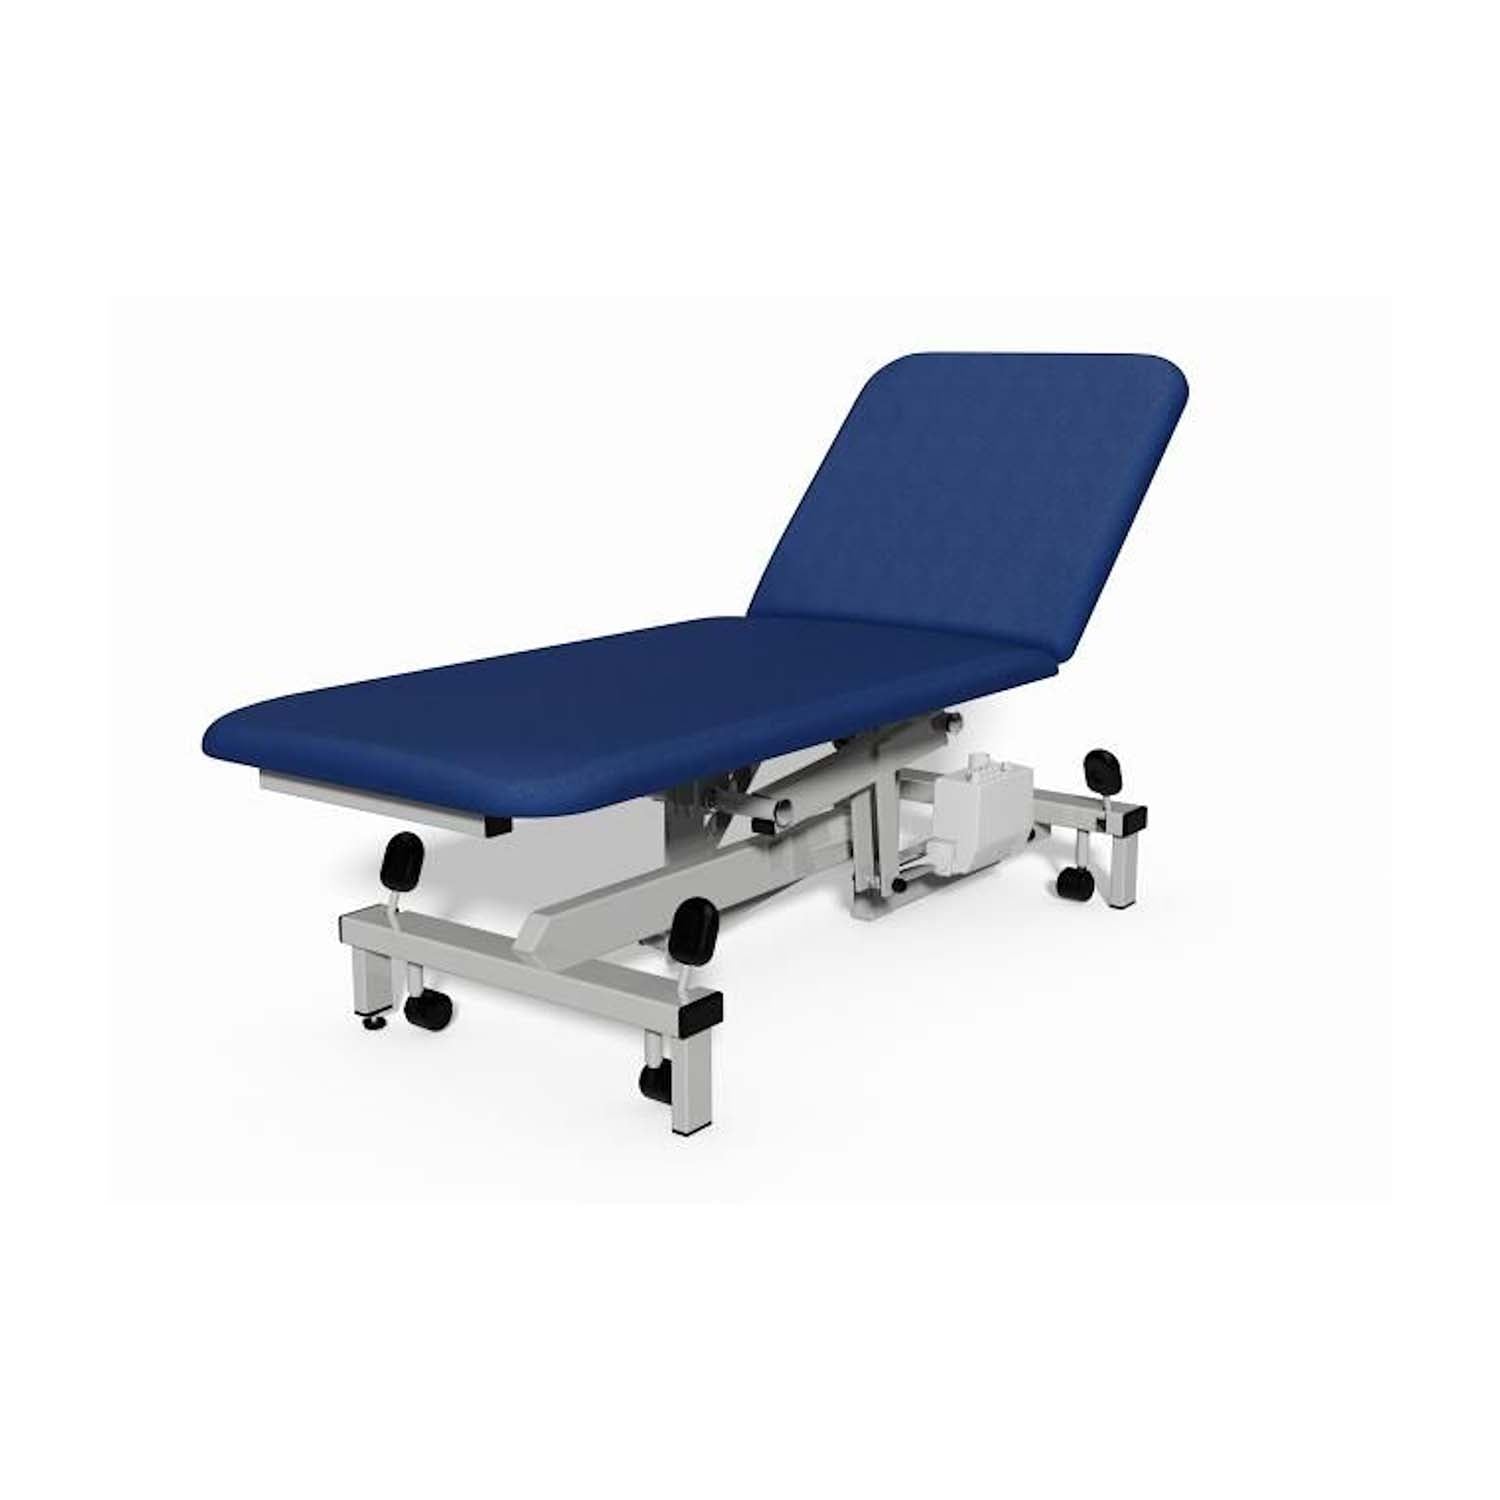 Plinth 2000 Model 502 Examination Couch | Electric | Sapphire